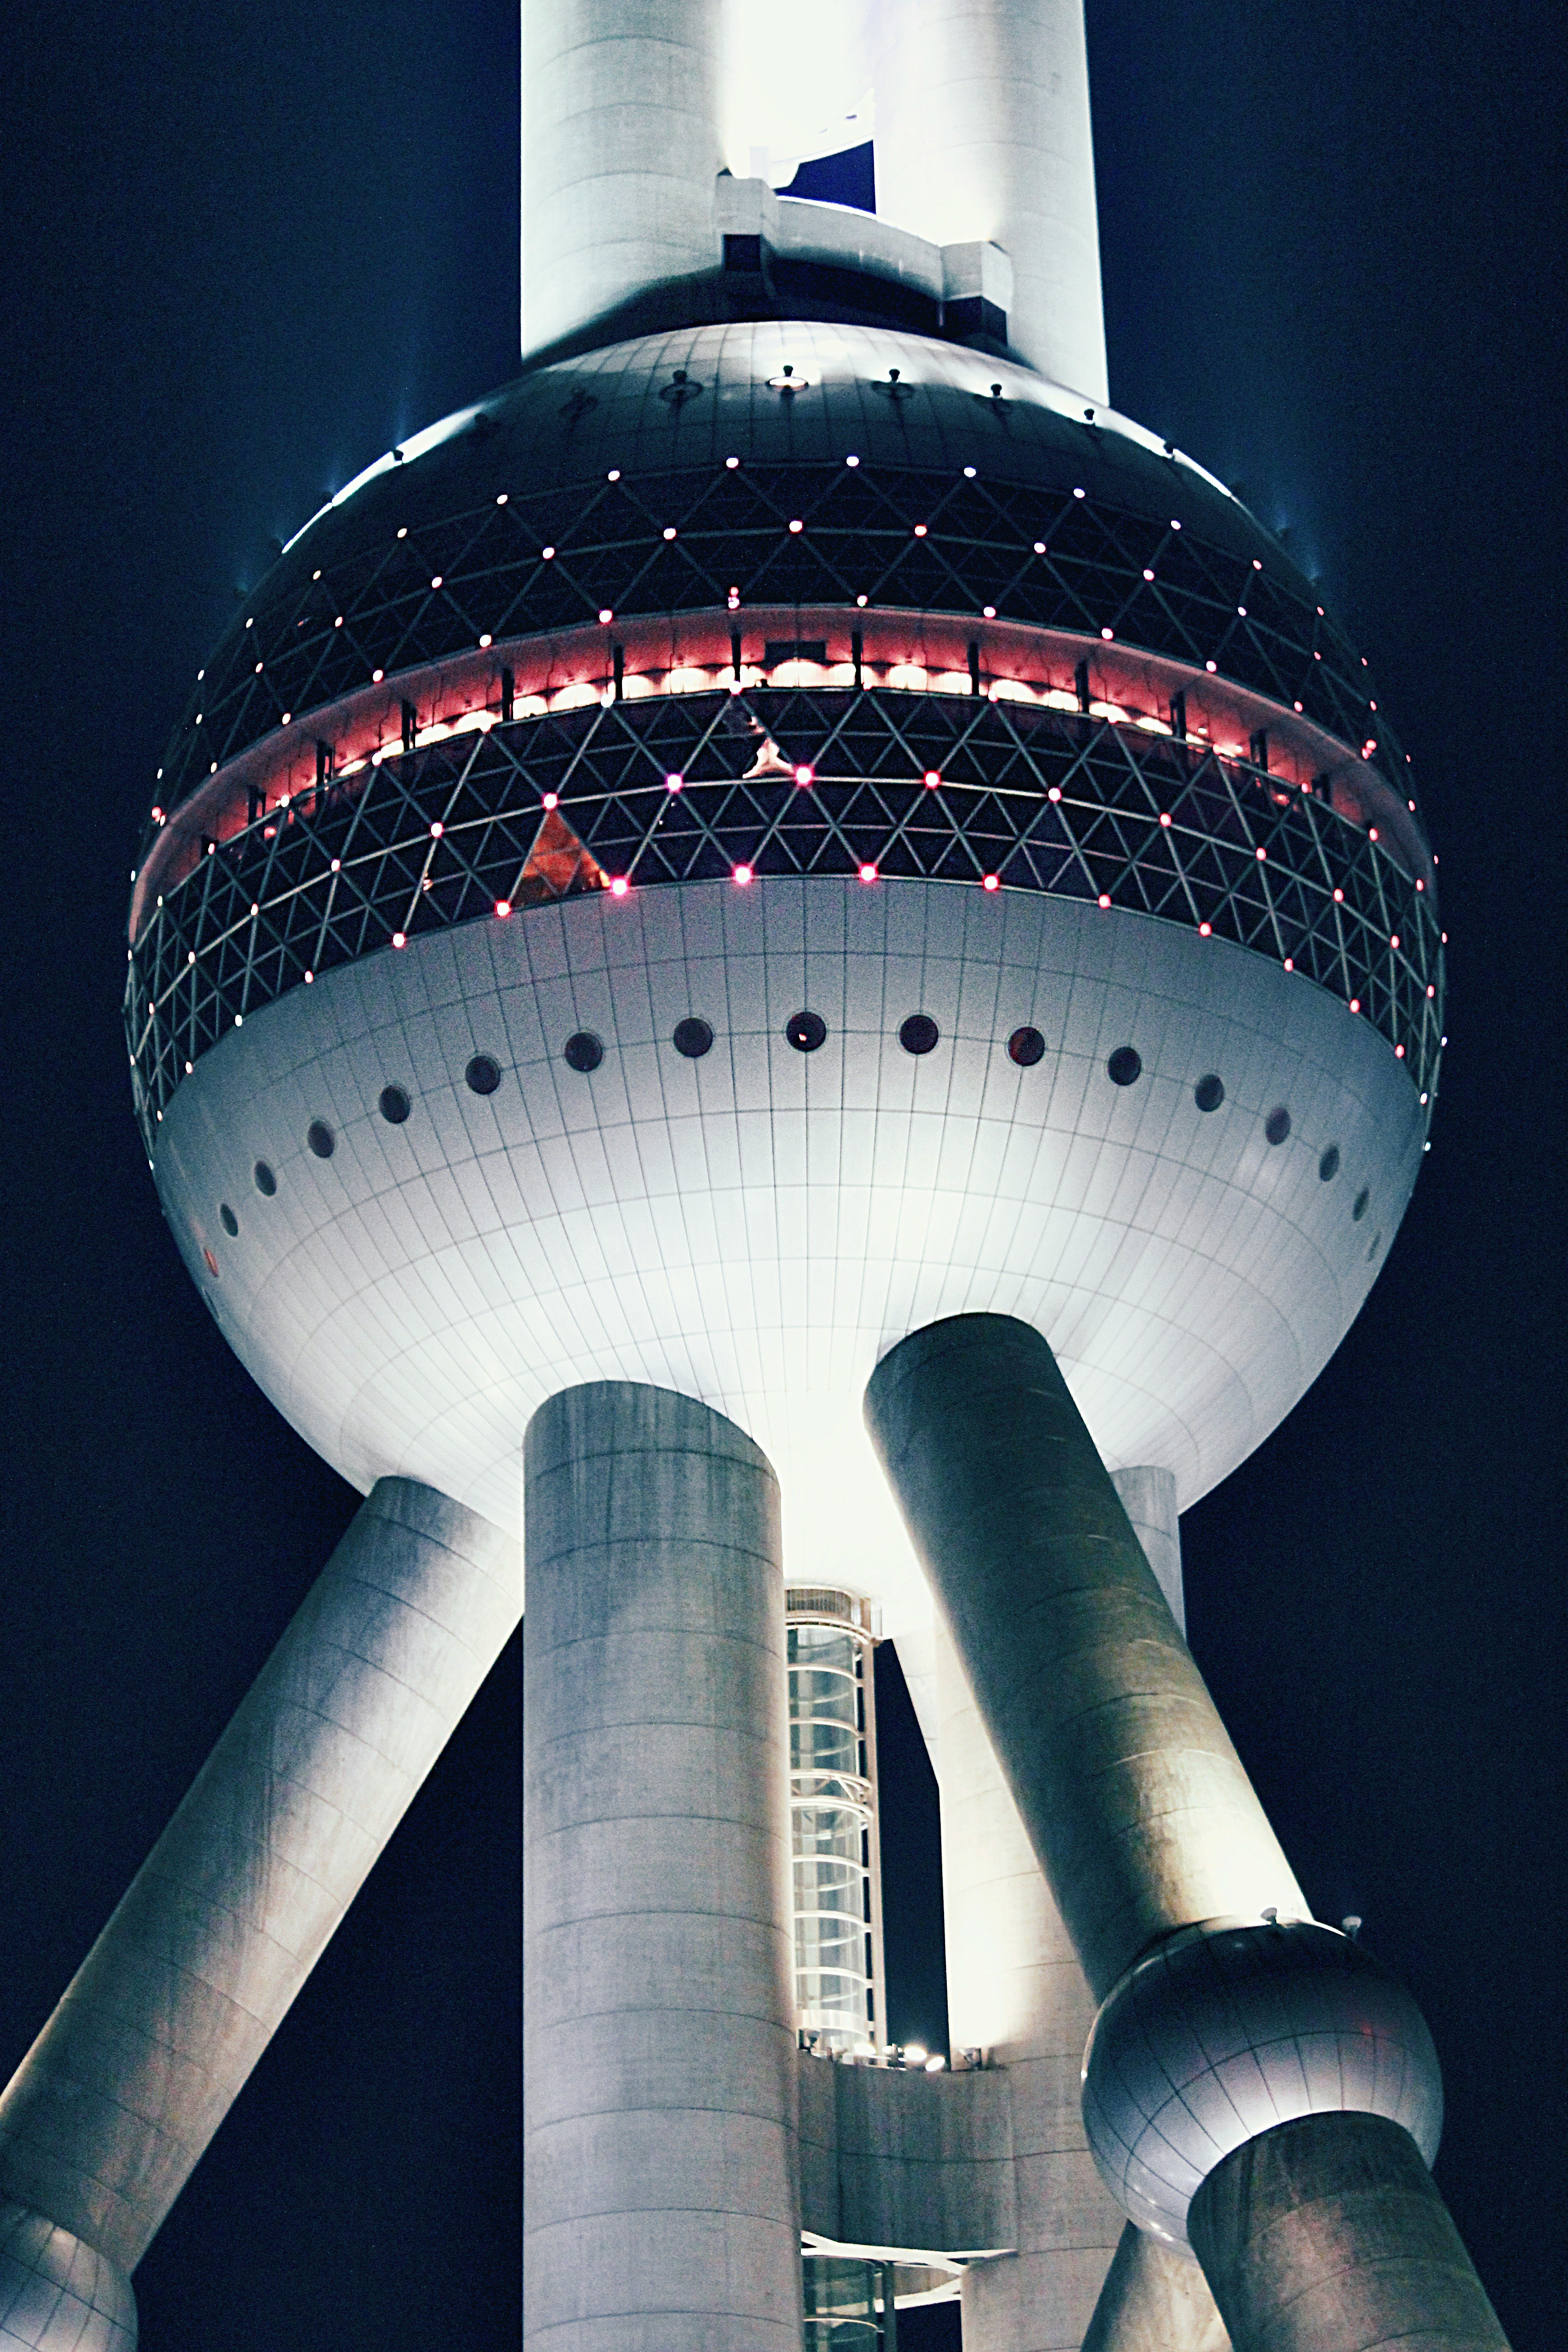 The Pearl Tower in Shanghai.